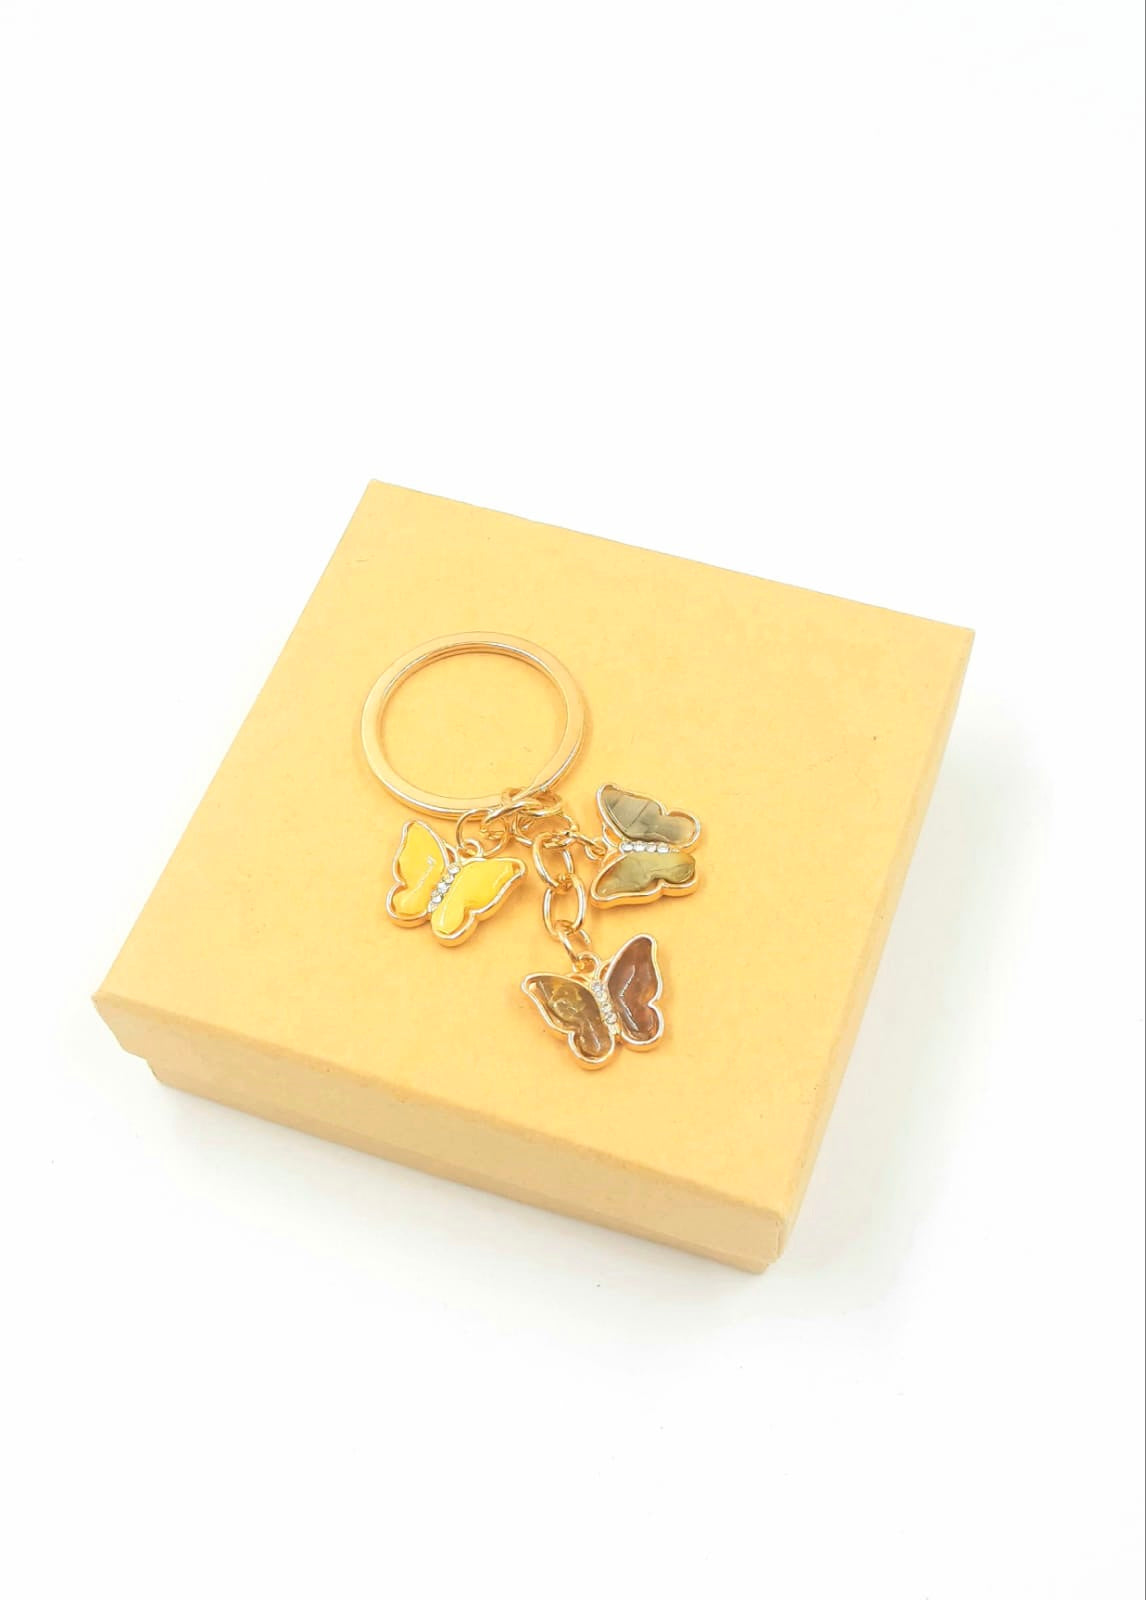 Keychain "Butterflies” decorated with amber mosaic